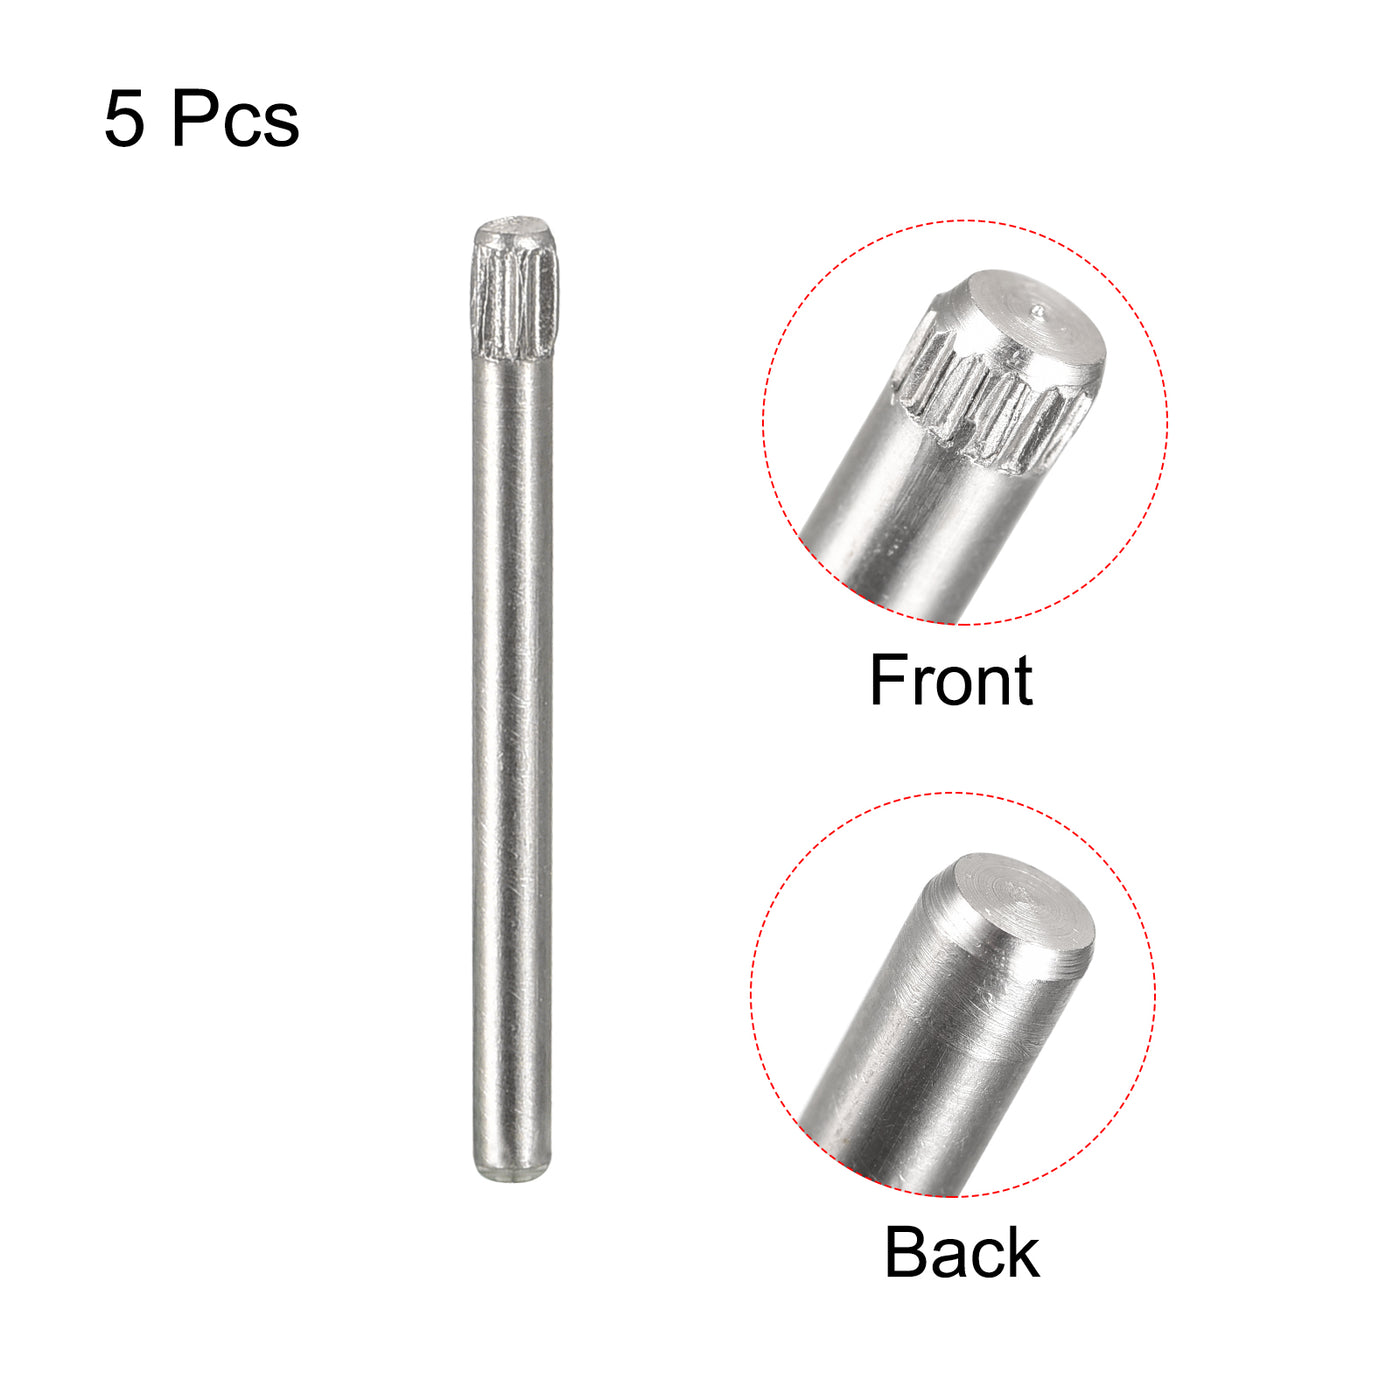 uxcell Uxcell 1.5x18mm 304 Stainless Steel Dowel Pins, 5Pcs Knurled Head Flat End Dowel Pin